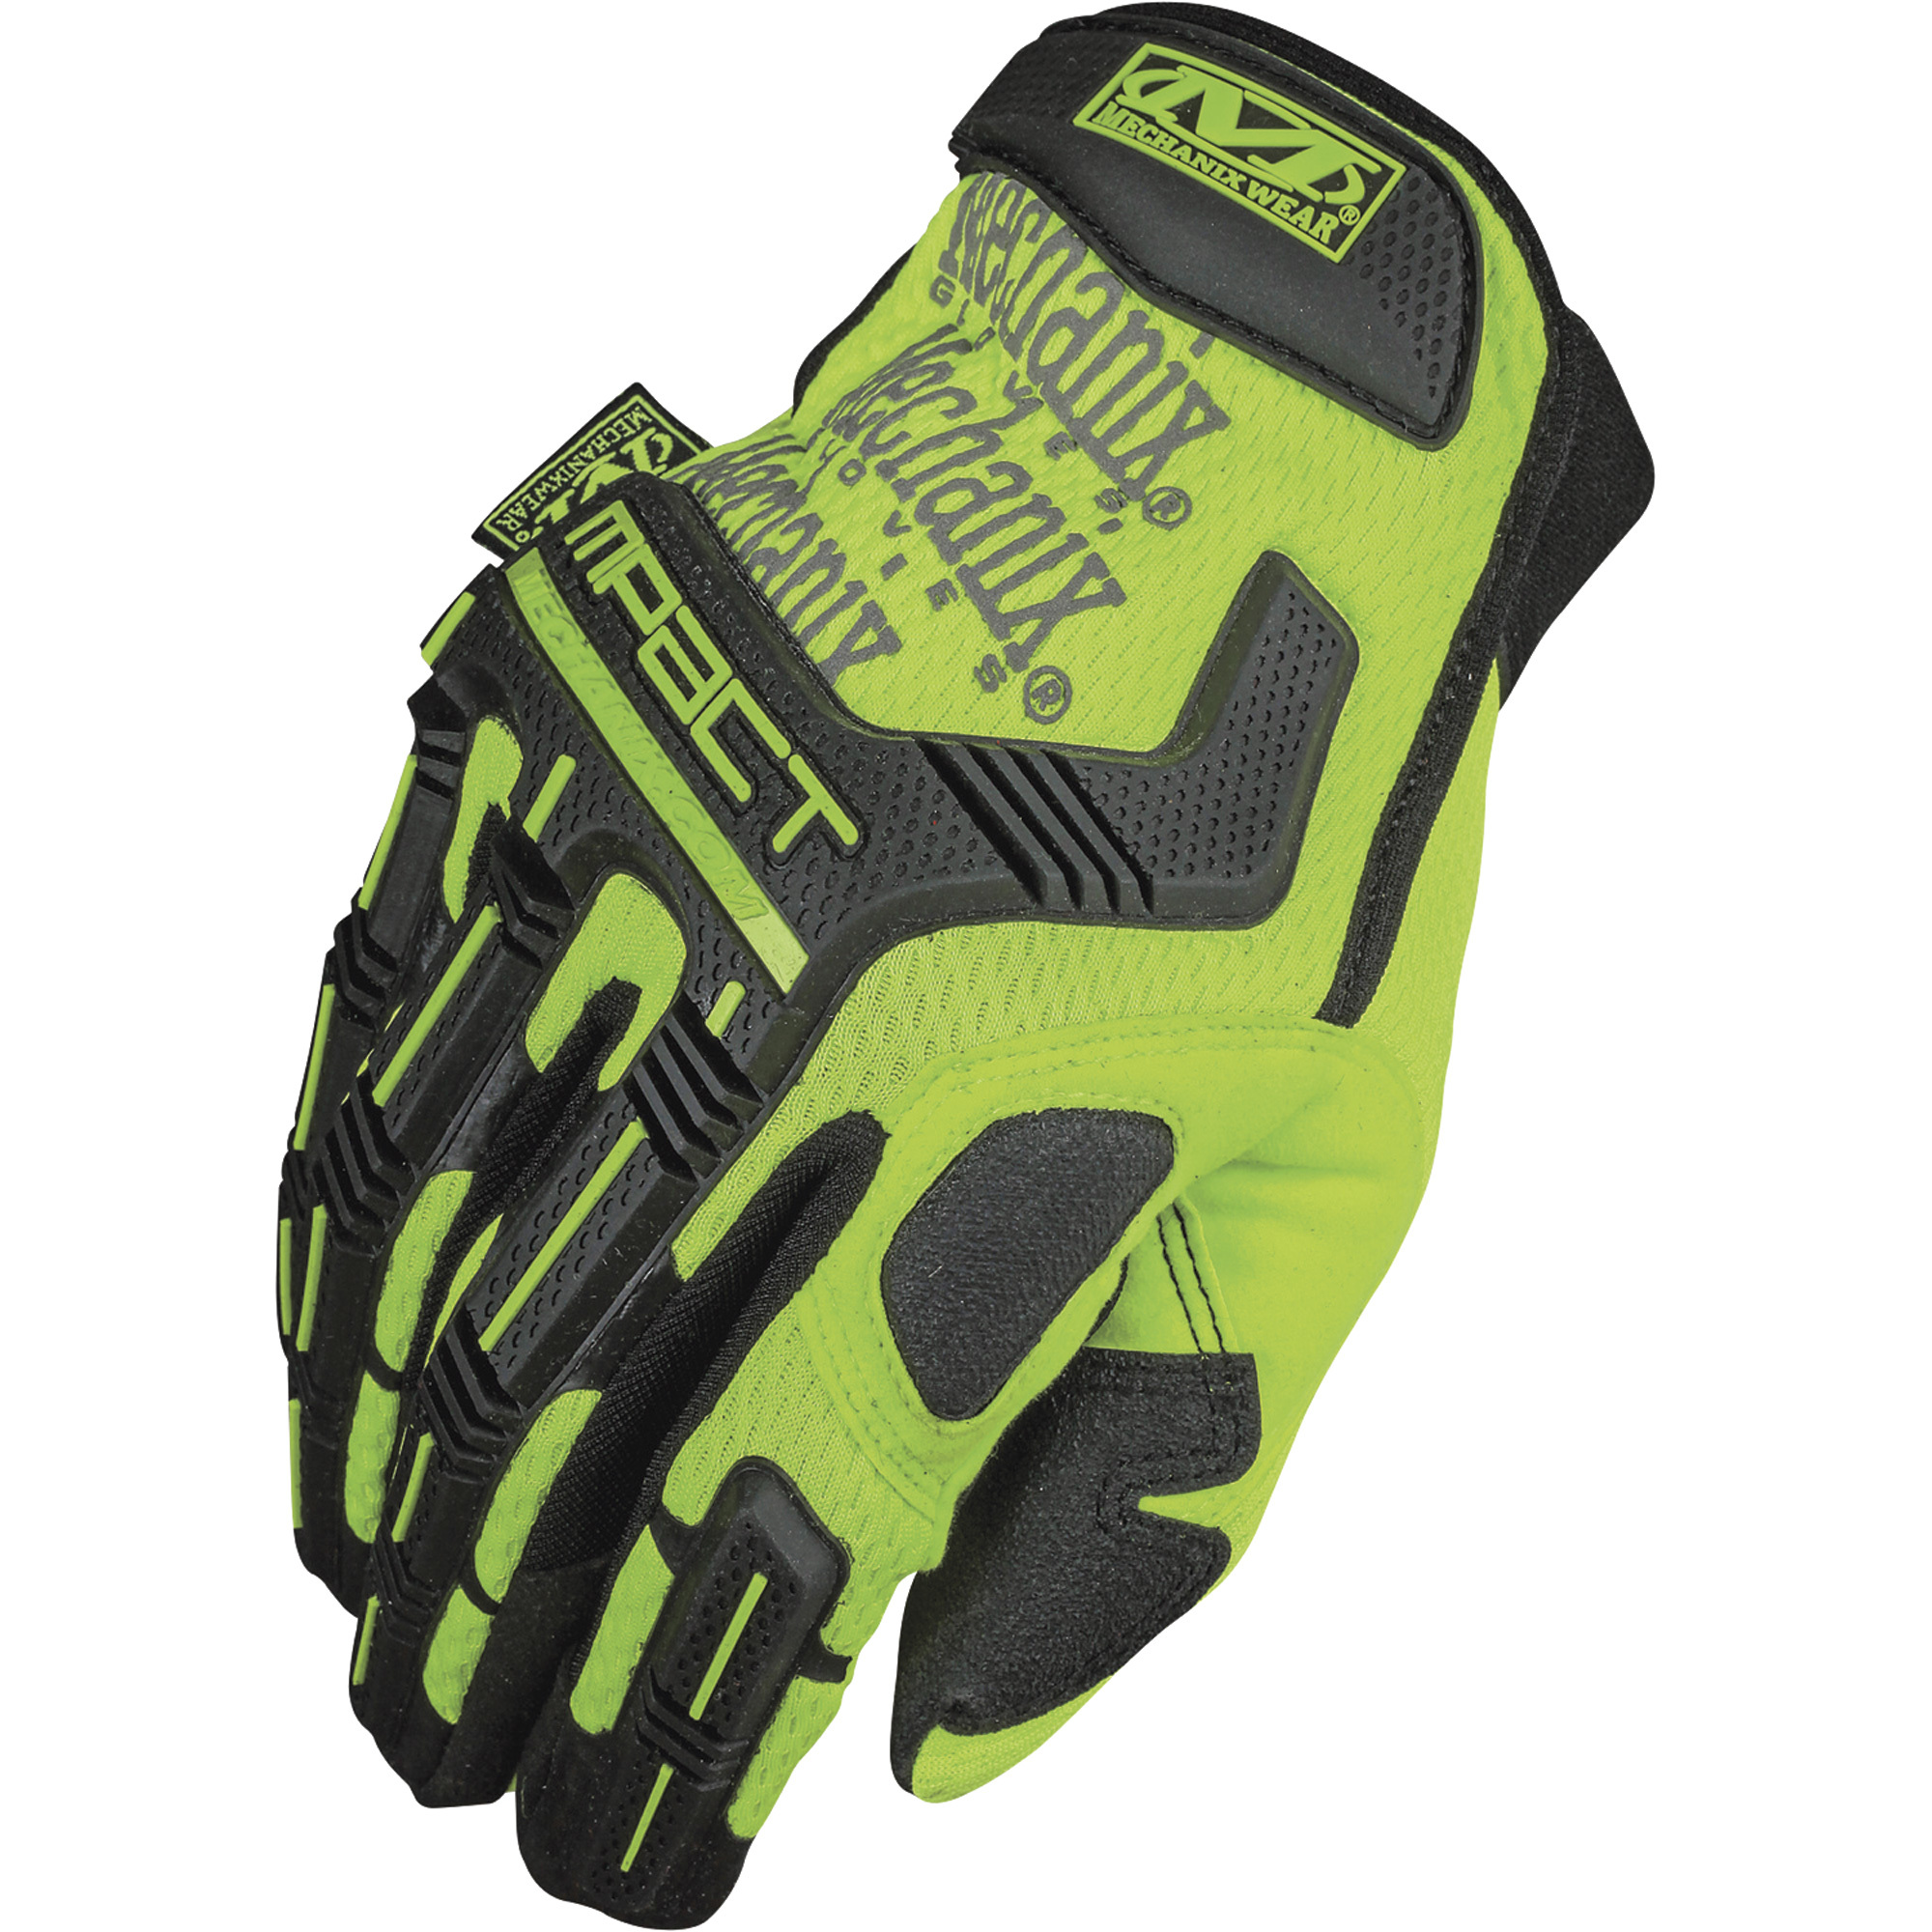 Mechanix Men's Wear Safety M-Pact Gloves - High-Visibility Yellow, 2XL, Model SMP-91-012